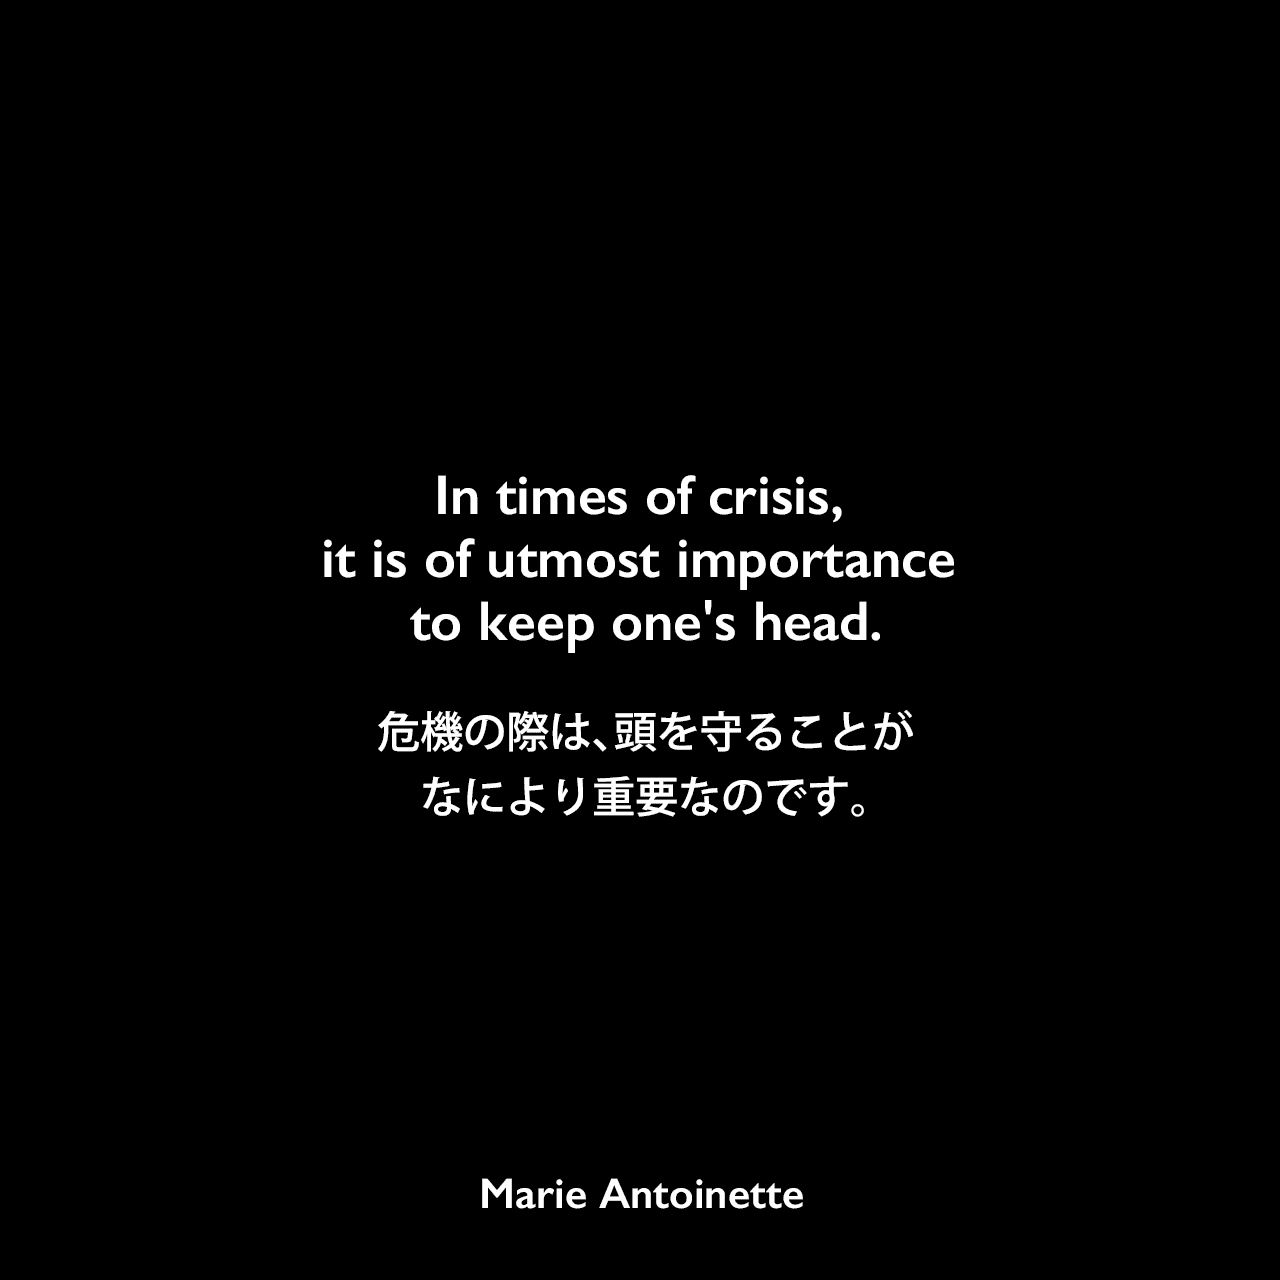 In times of crisis, it is of utmost importance to keep one's head.危機の際は、頭を守ることがなにより重要なのです。Marie Antoinette